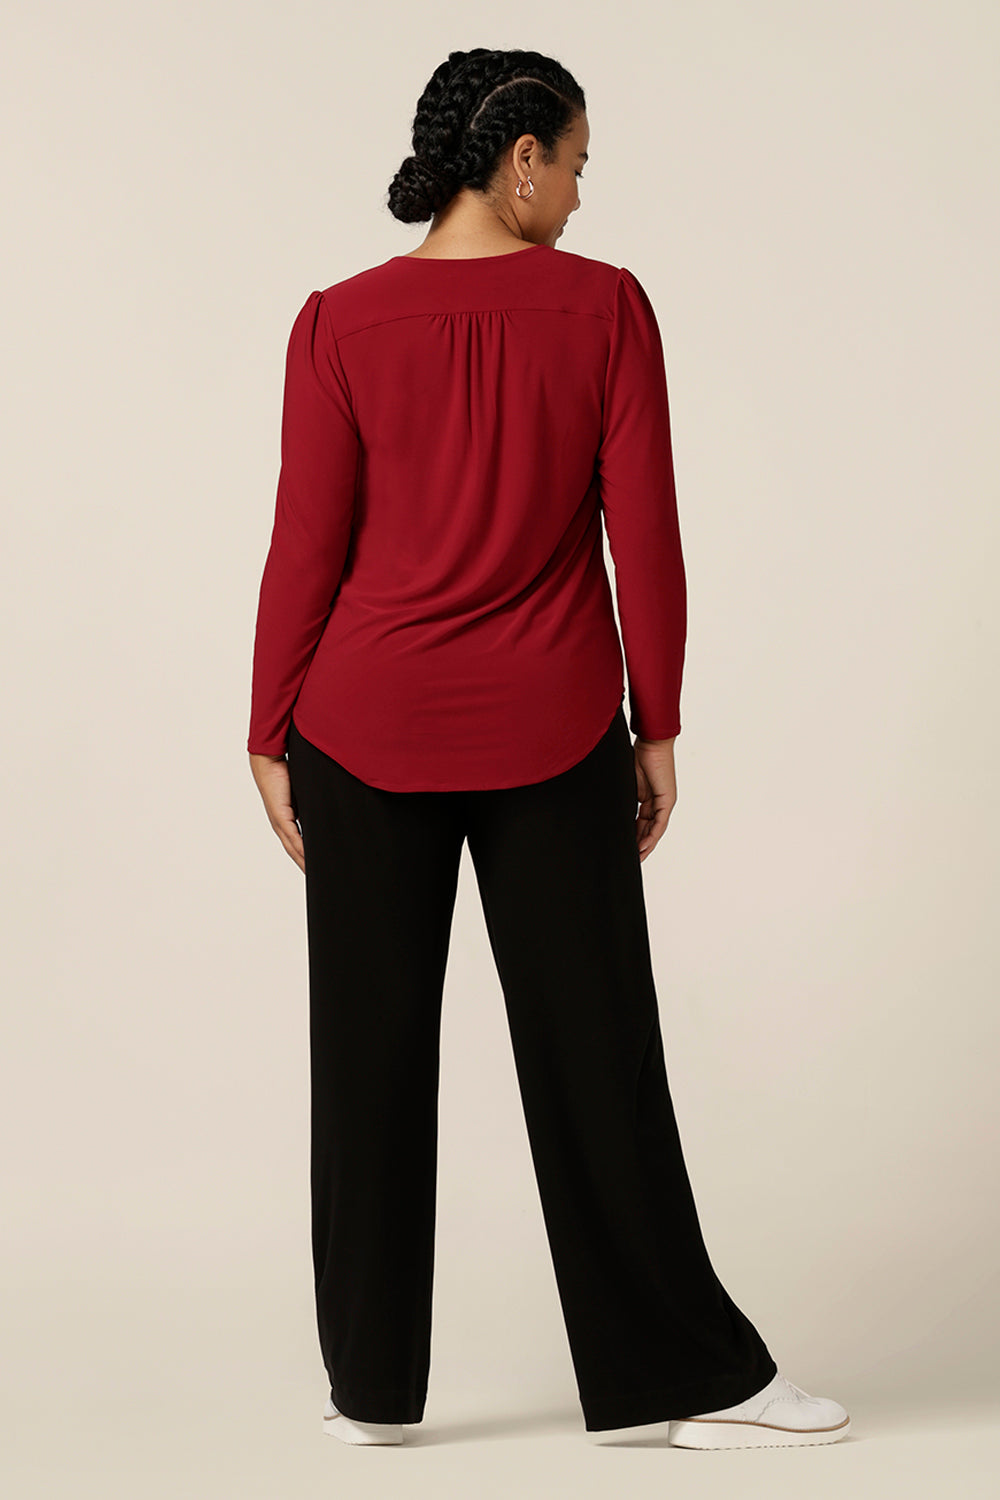 Back view of a size 12, curvy woman wearing a V neck jersey top in flame red jersey. With long sleeves, this top is a good autumn/winter top, and is styled here with wide leg black pants for a casual look.